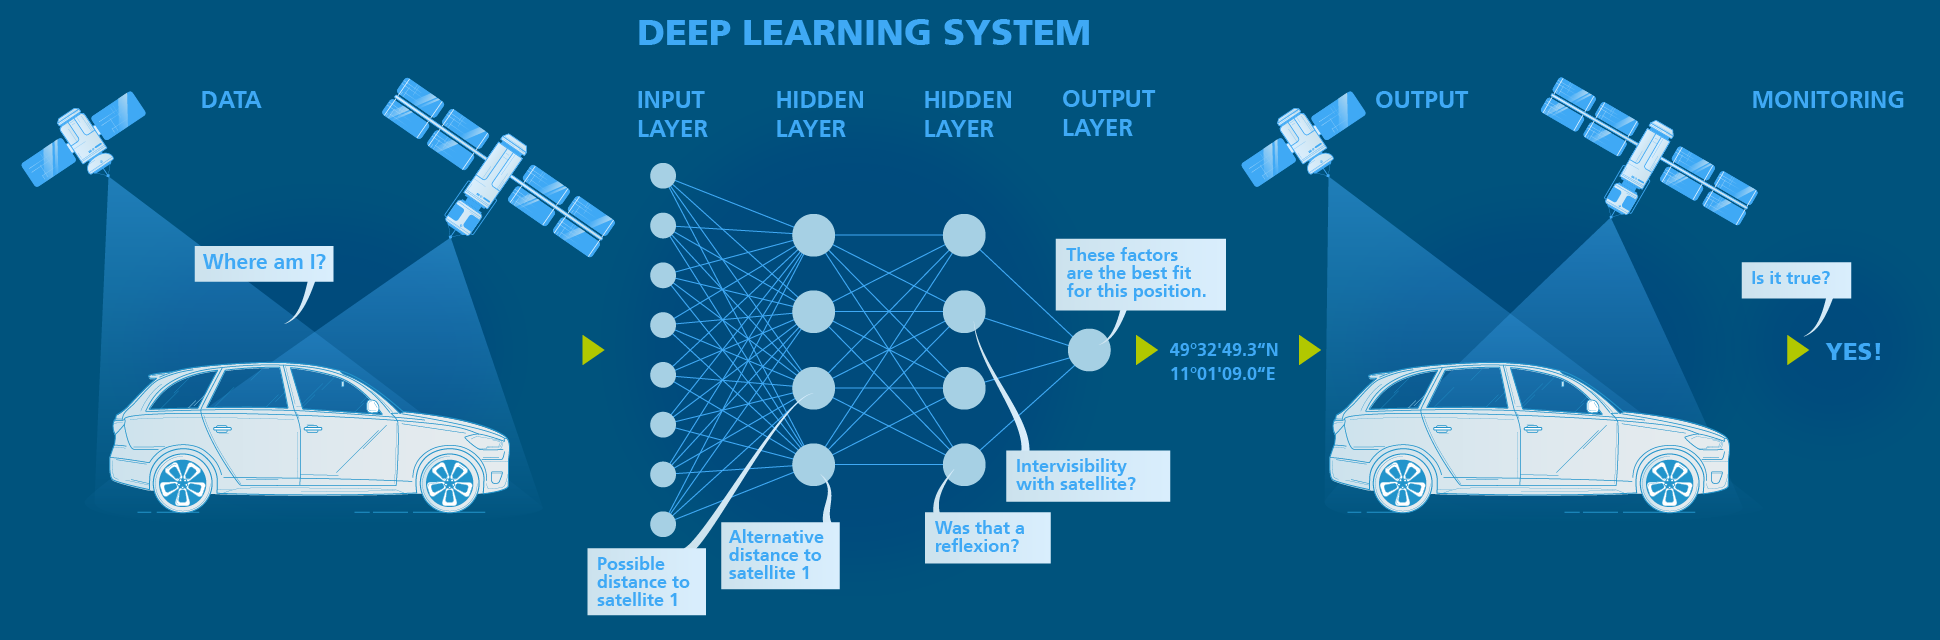 Deep Learning System